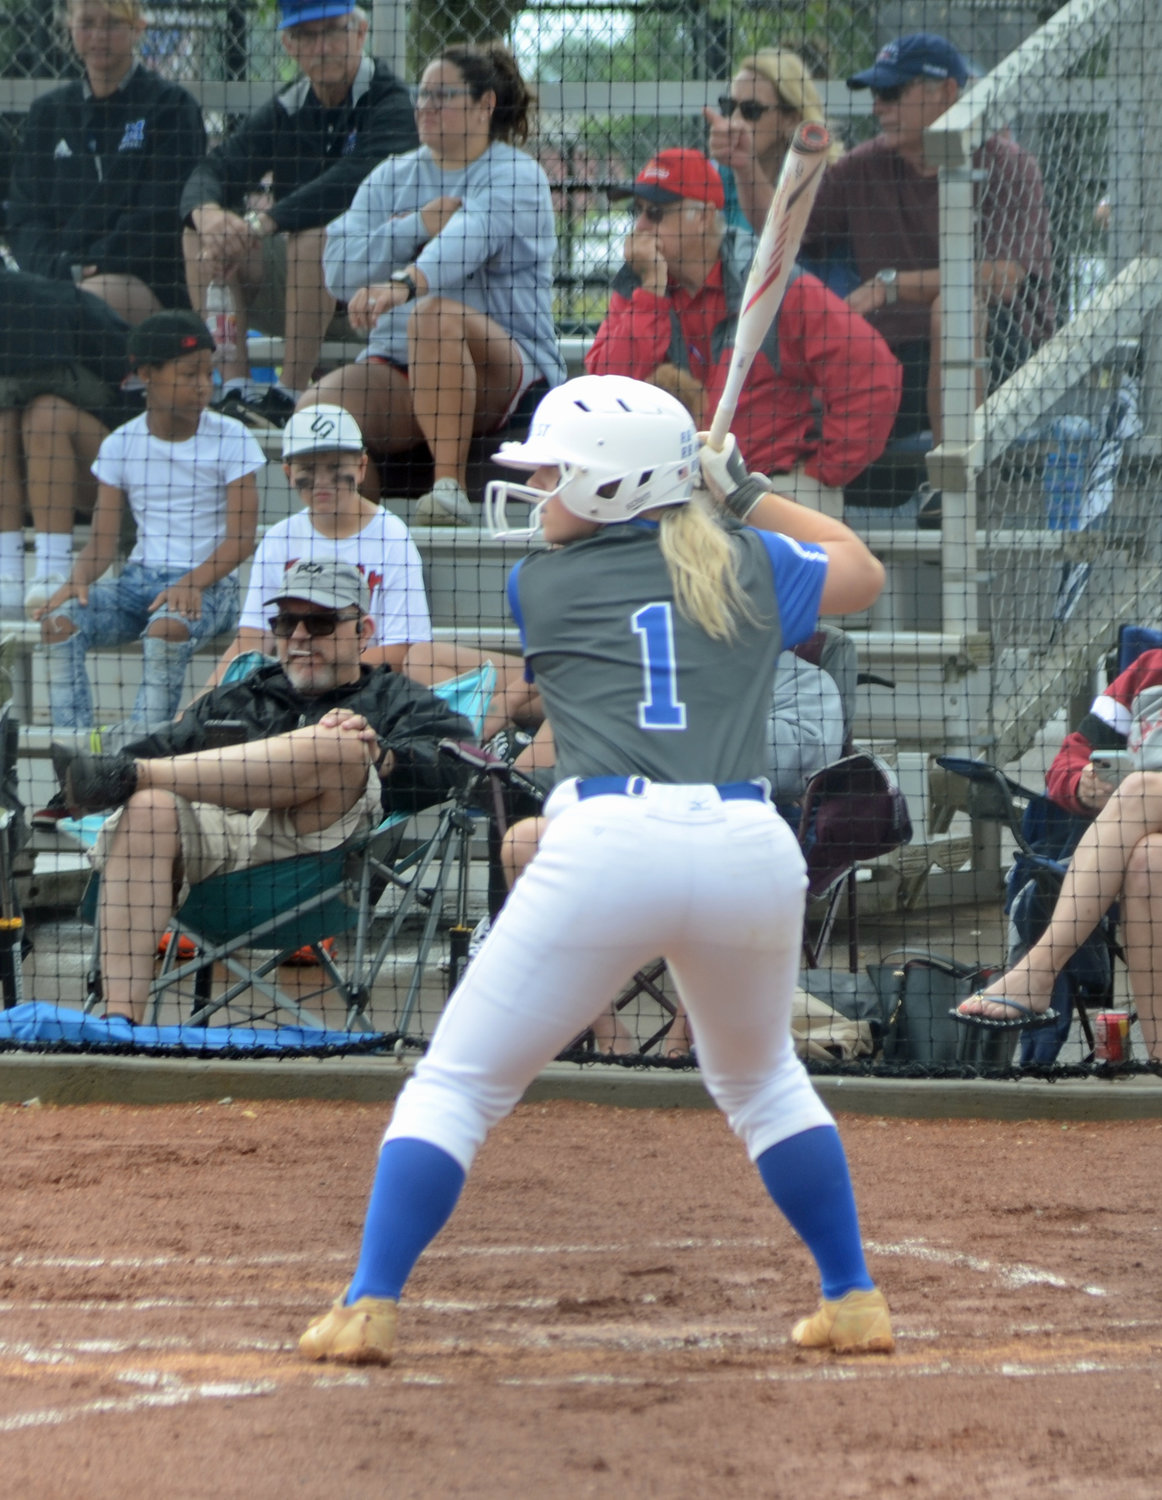 Christa Warren slammed a go-ahead two-run homerun in the bottom of the fifth inning for Forrest.